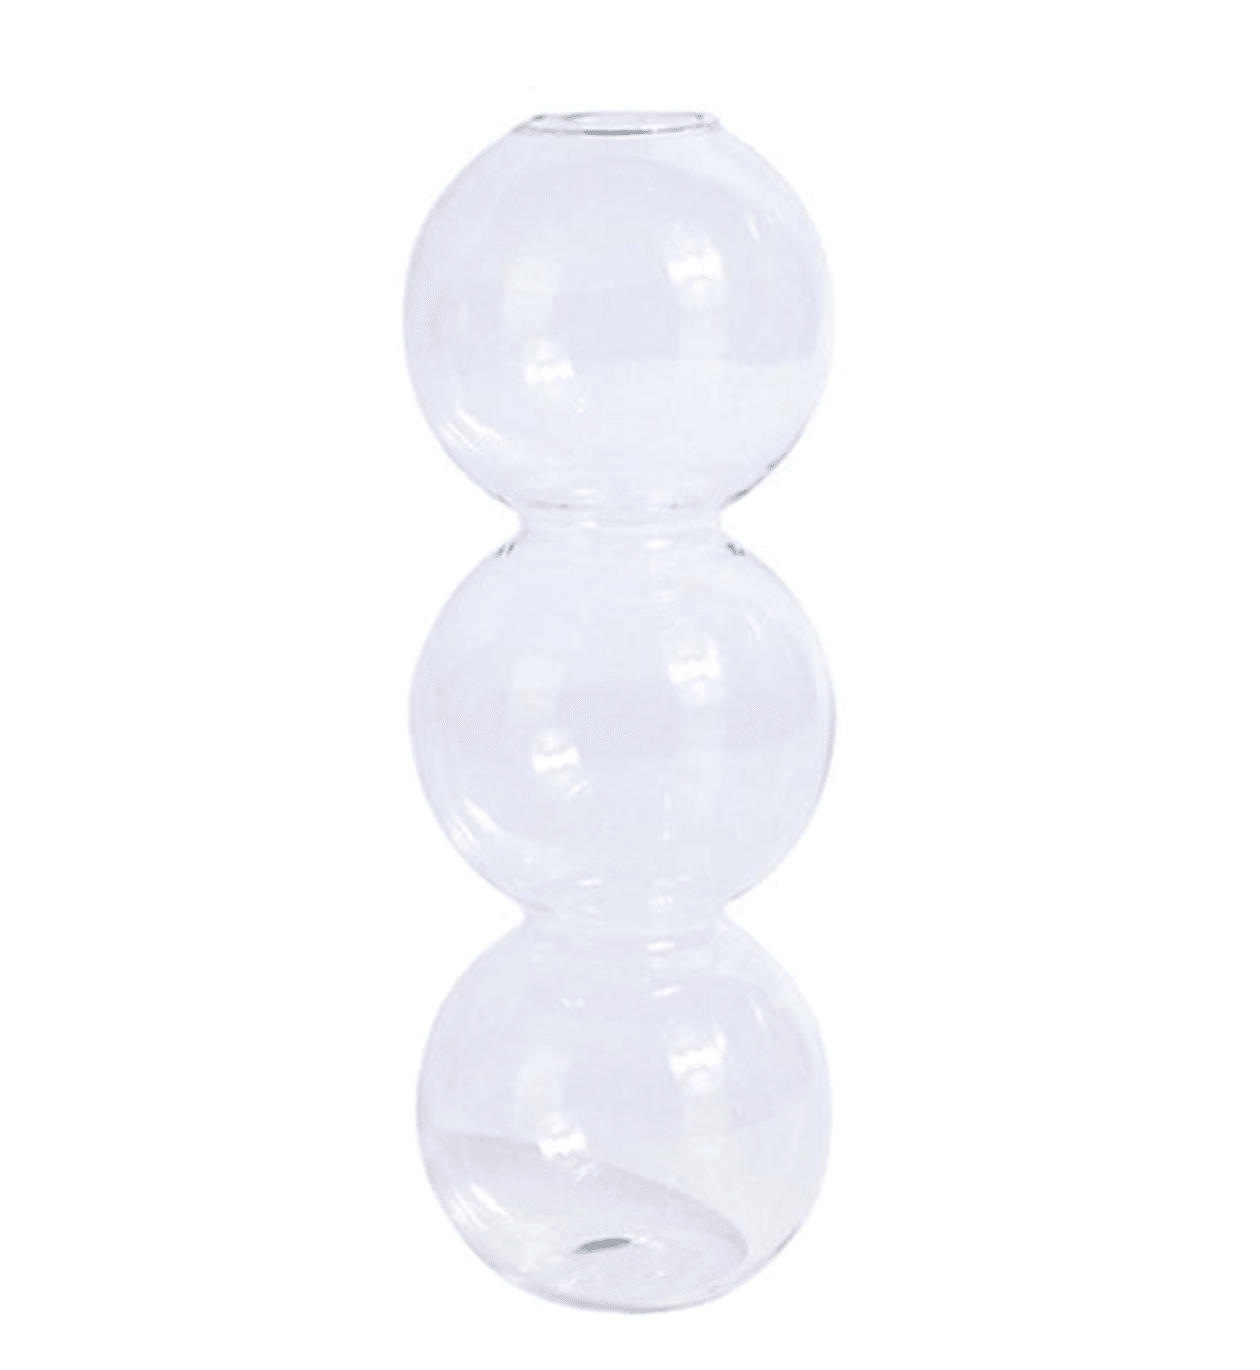 Bubble Glass Vase - Hydroponic Glass Vases for Wedding Table Centerpieces Home Decor - Biu Home